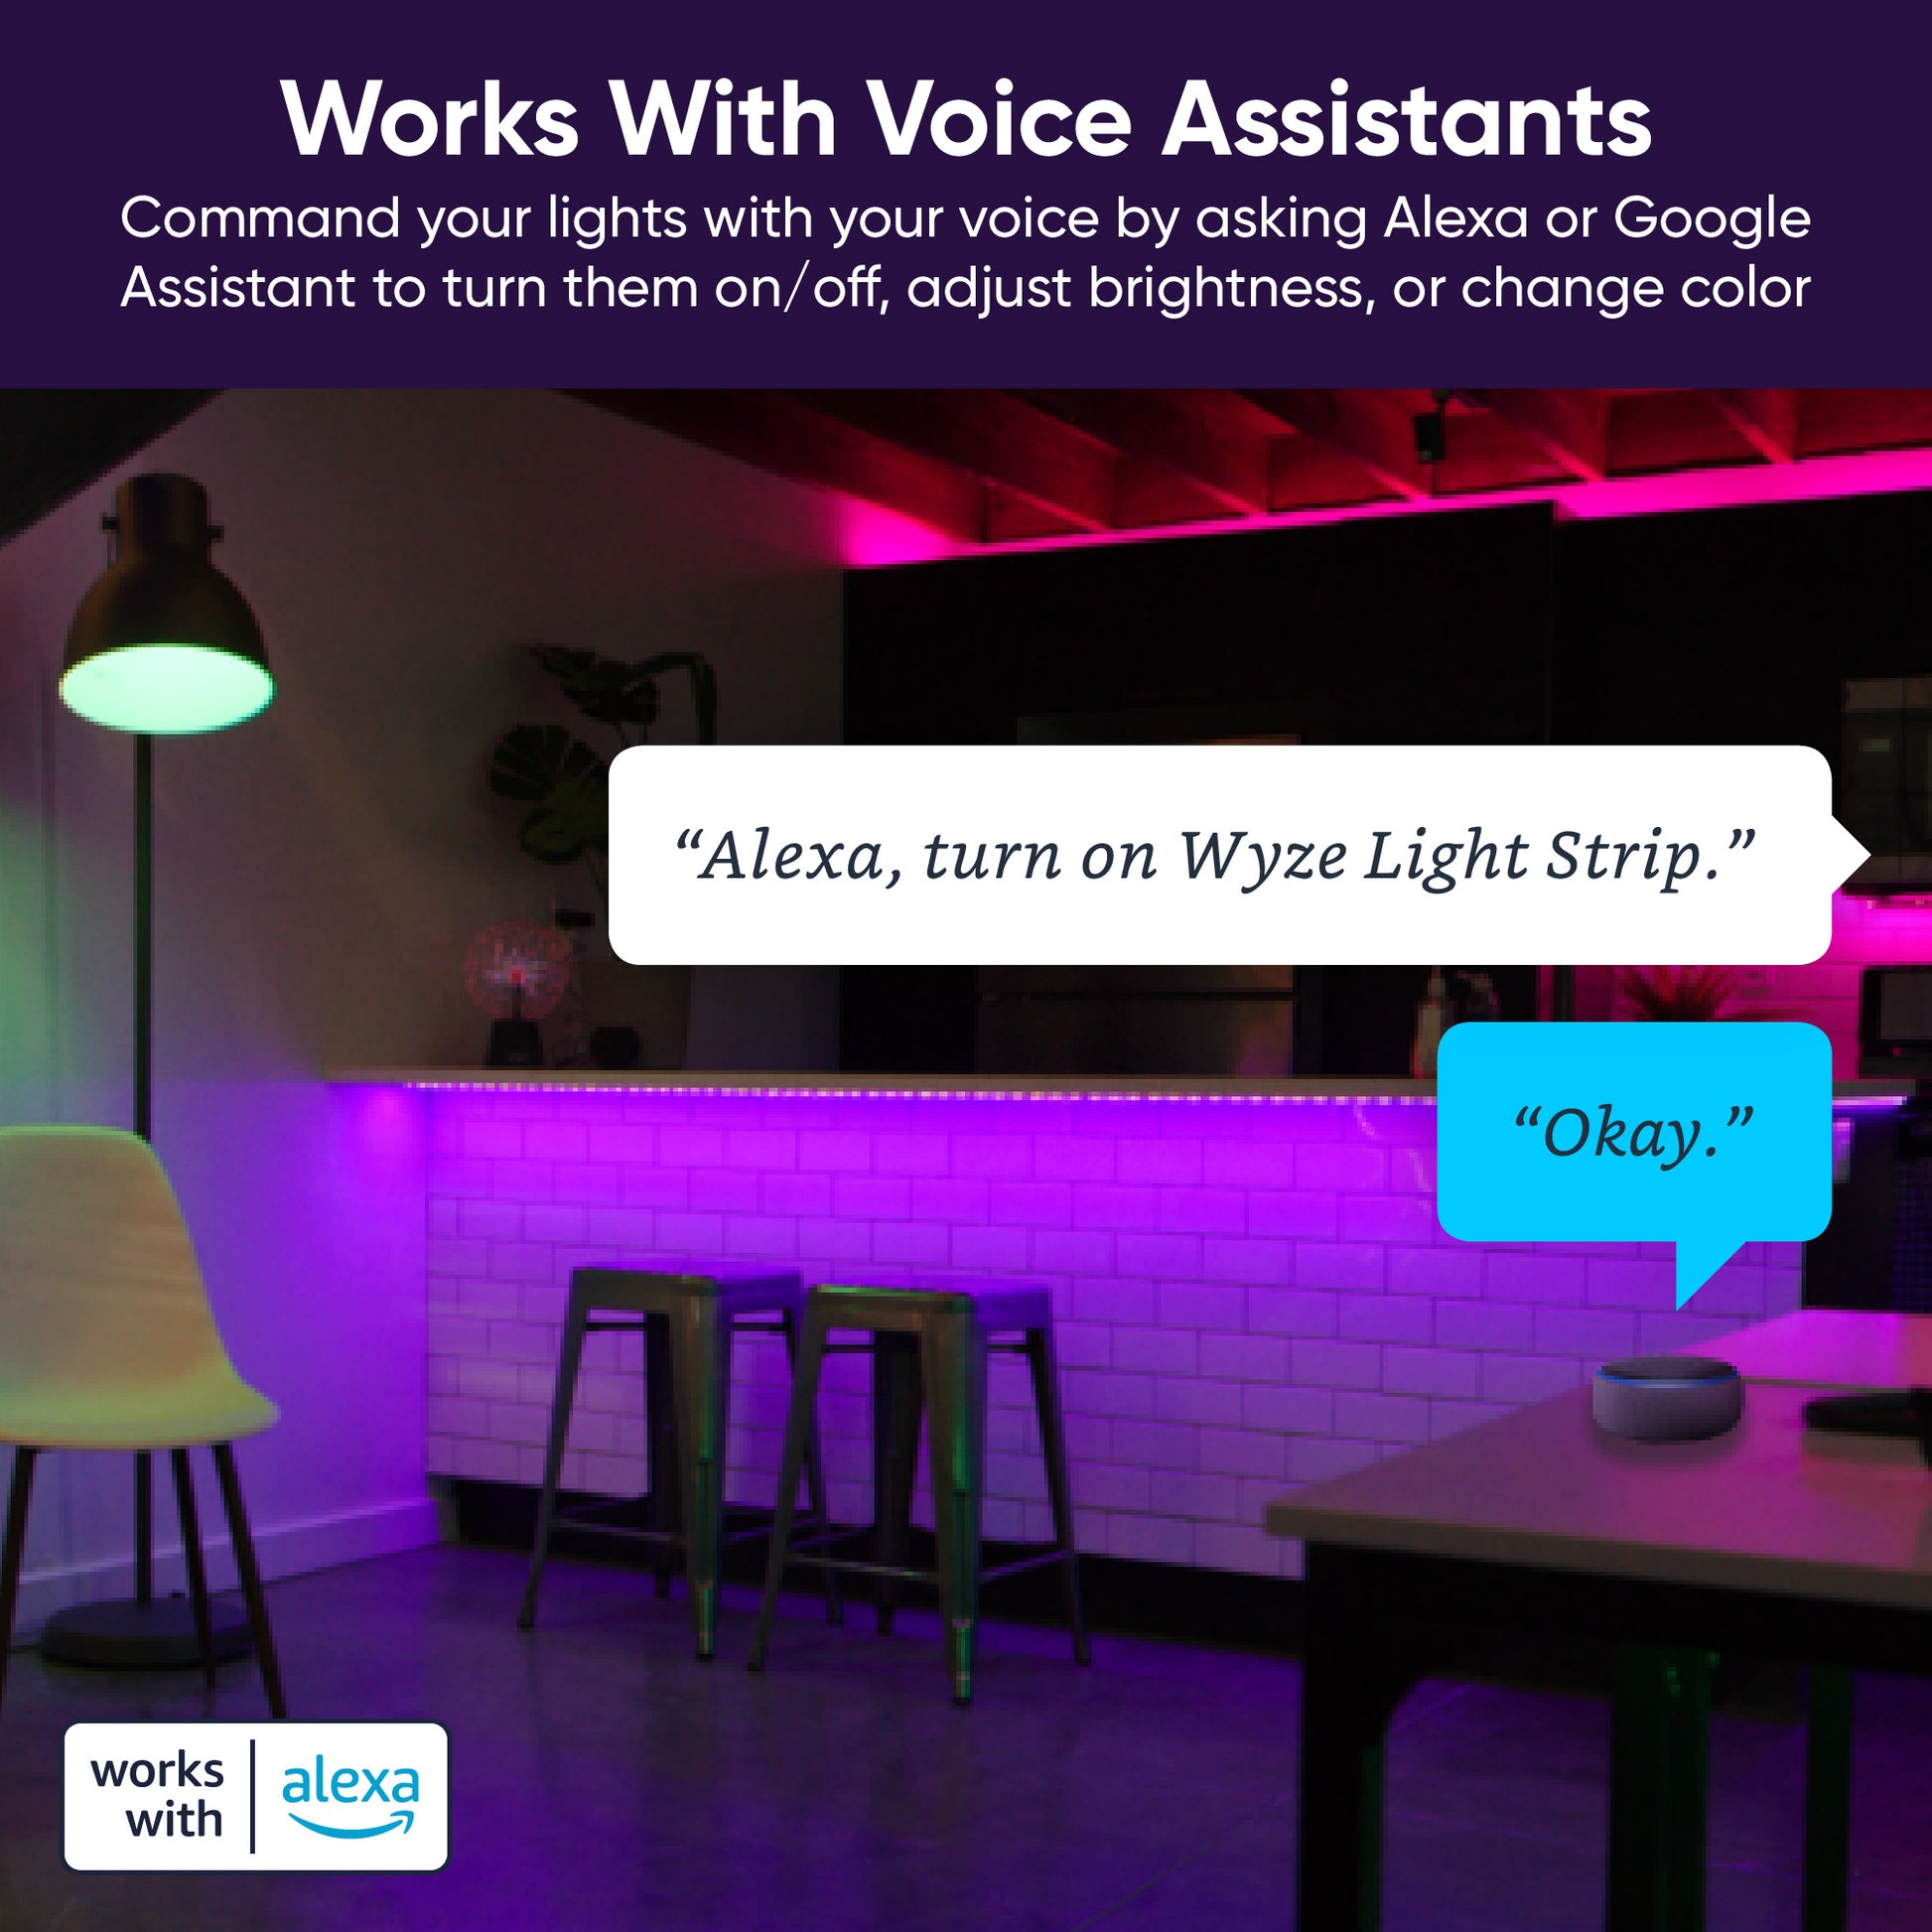 Pink hue lighting up the ceiling and purple lighting lining the bar. White text overlay that says "Control your lights with just your voice. Works with voice assistants."